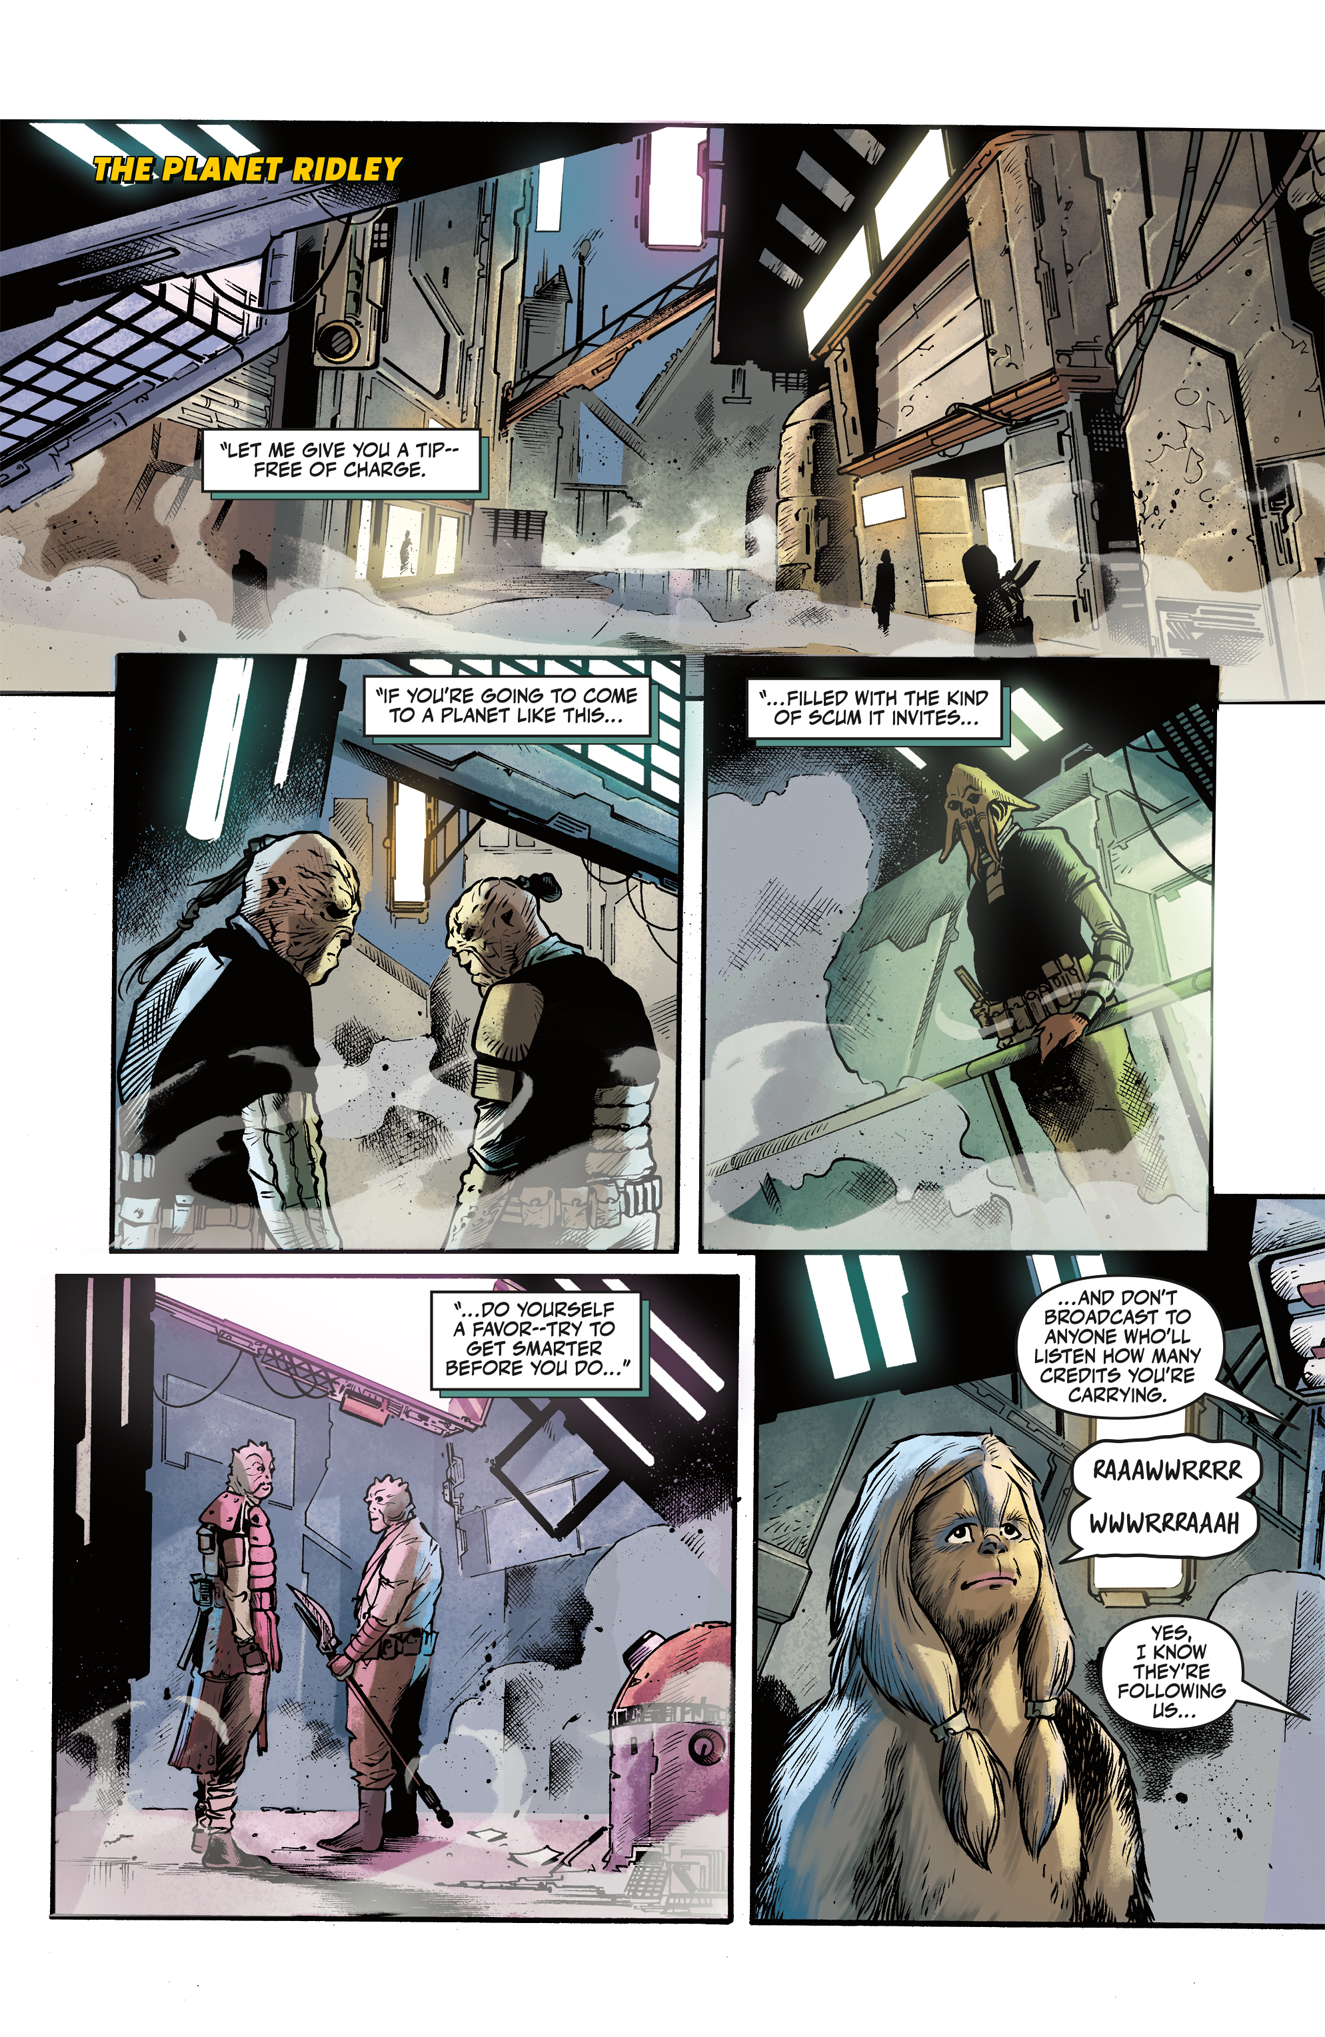 Hyperspace Stories #7 preview page 1